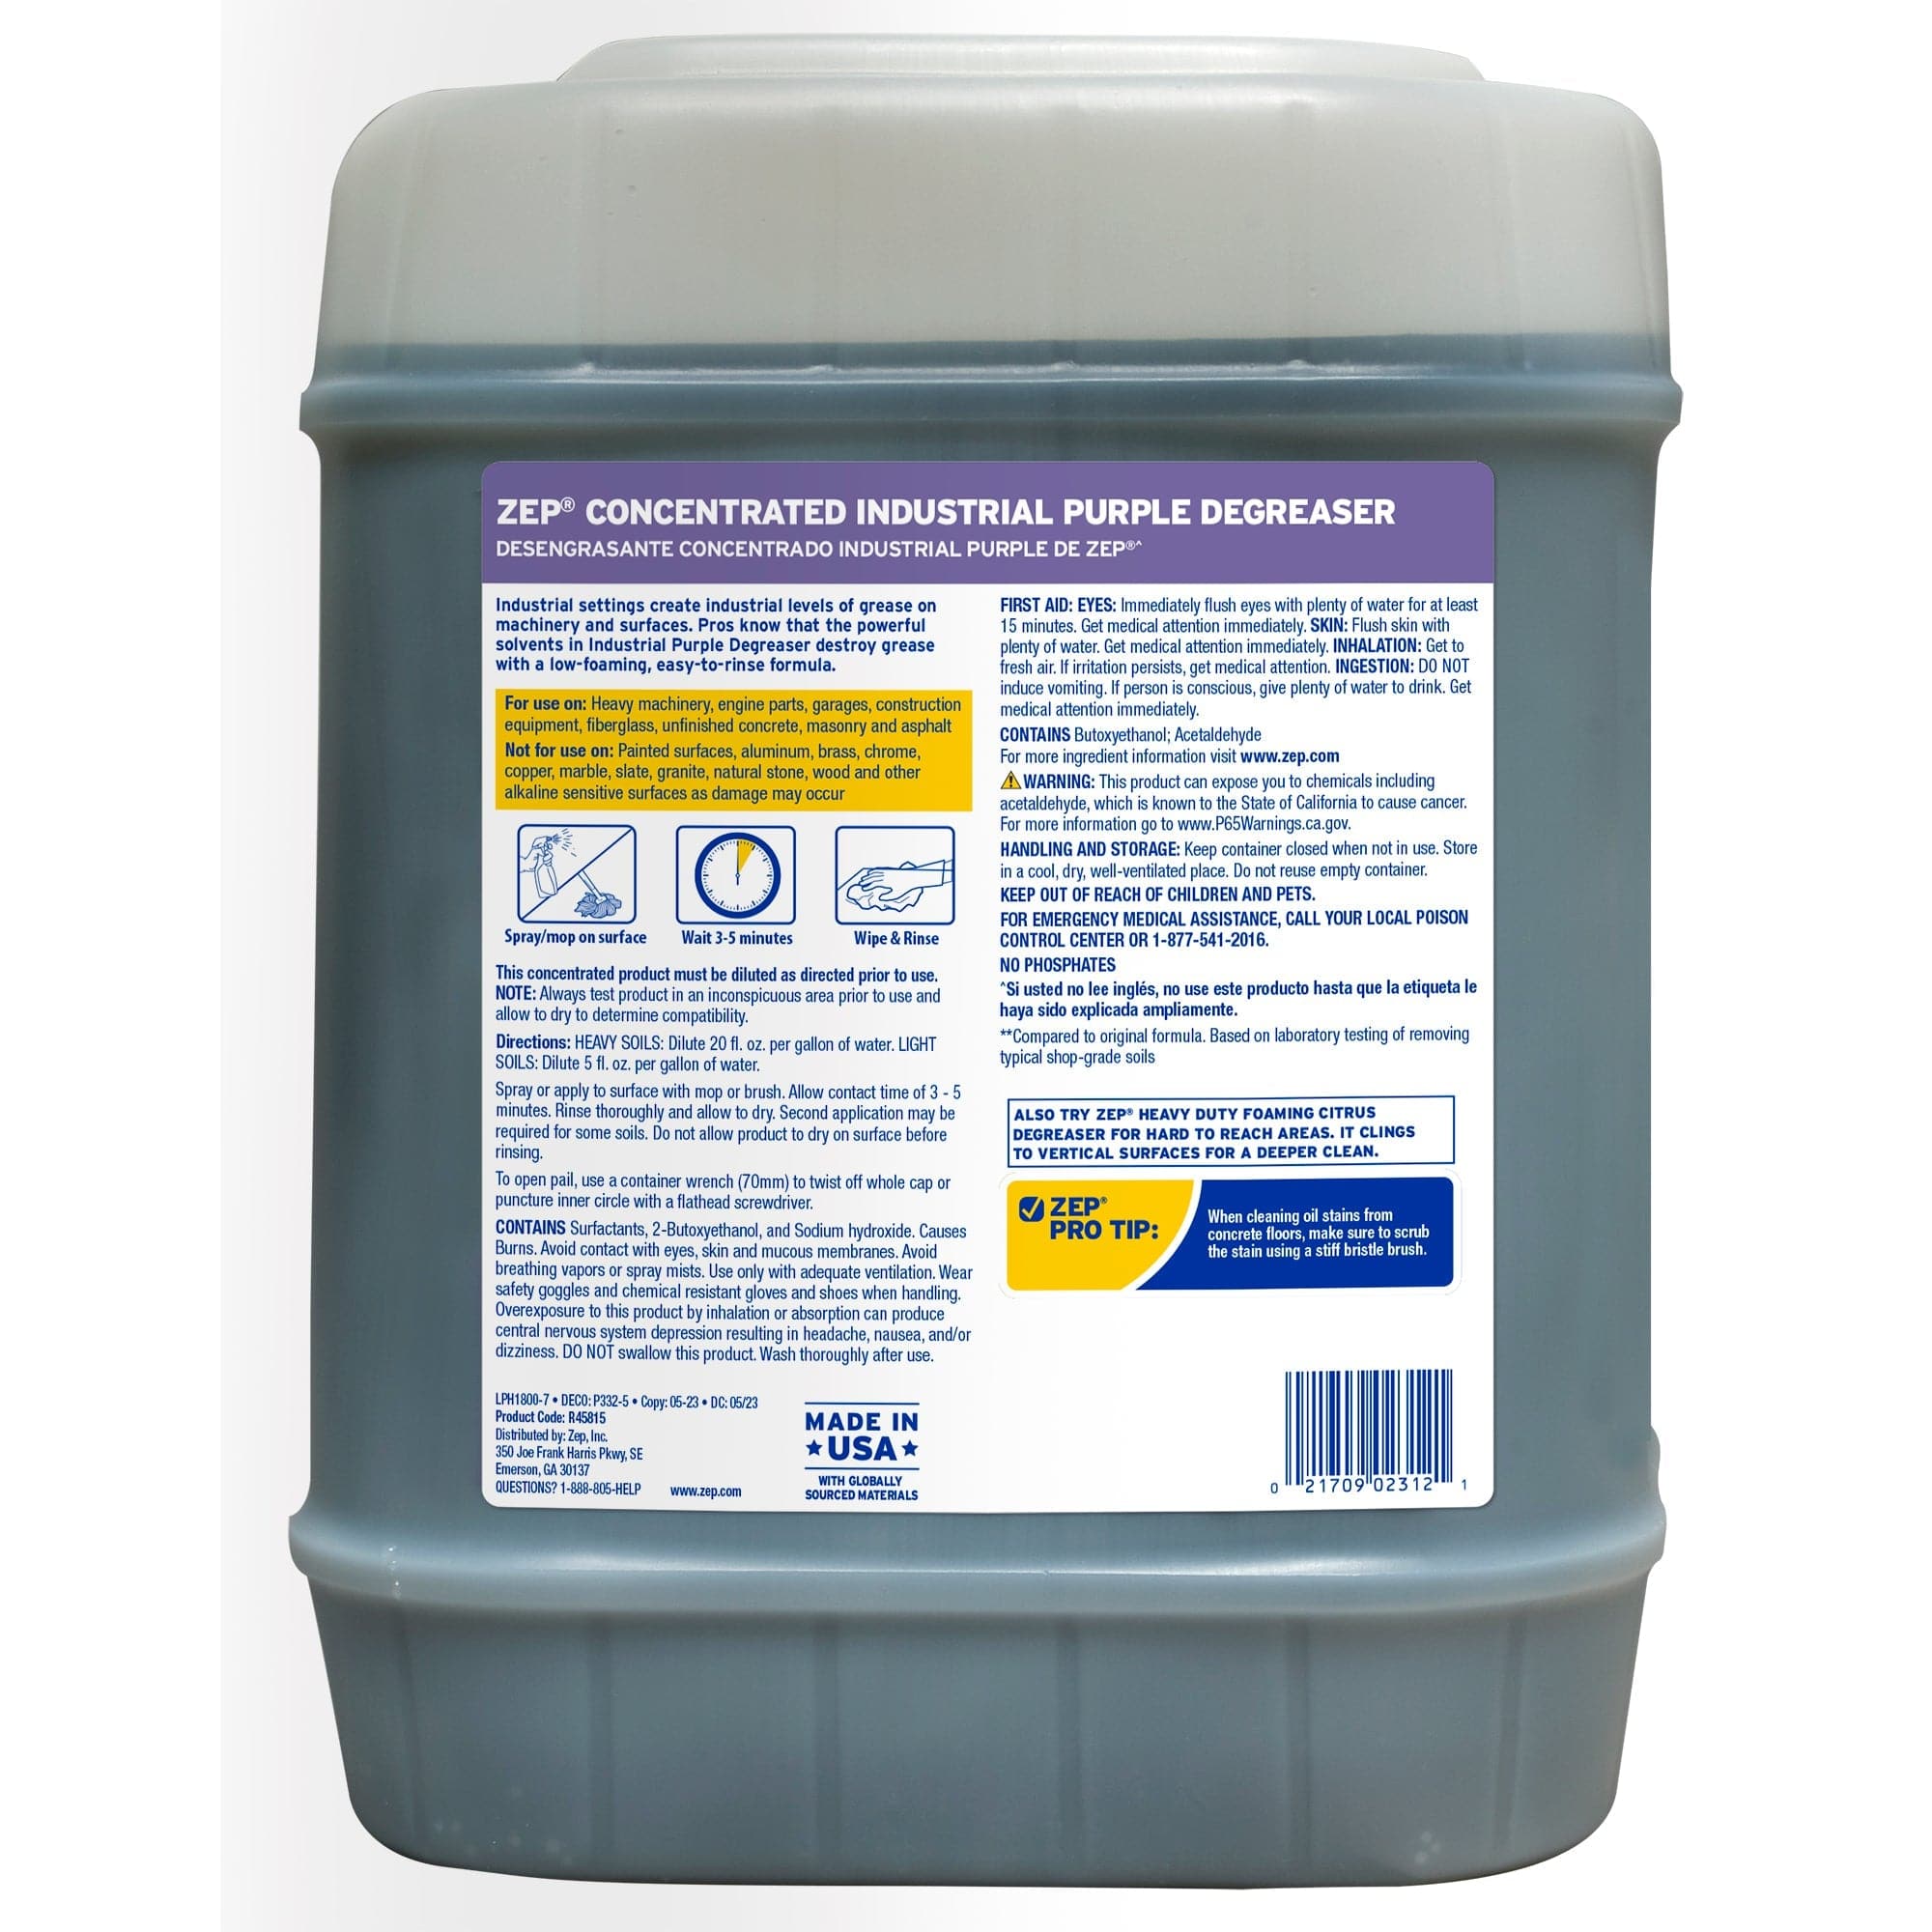 Zep Industrial Purple Cleaner and Degreaser Concentrate - 5 Gal (1 Pail) - R45815 - Zep's Most Powerful Deep Cleaning Formula